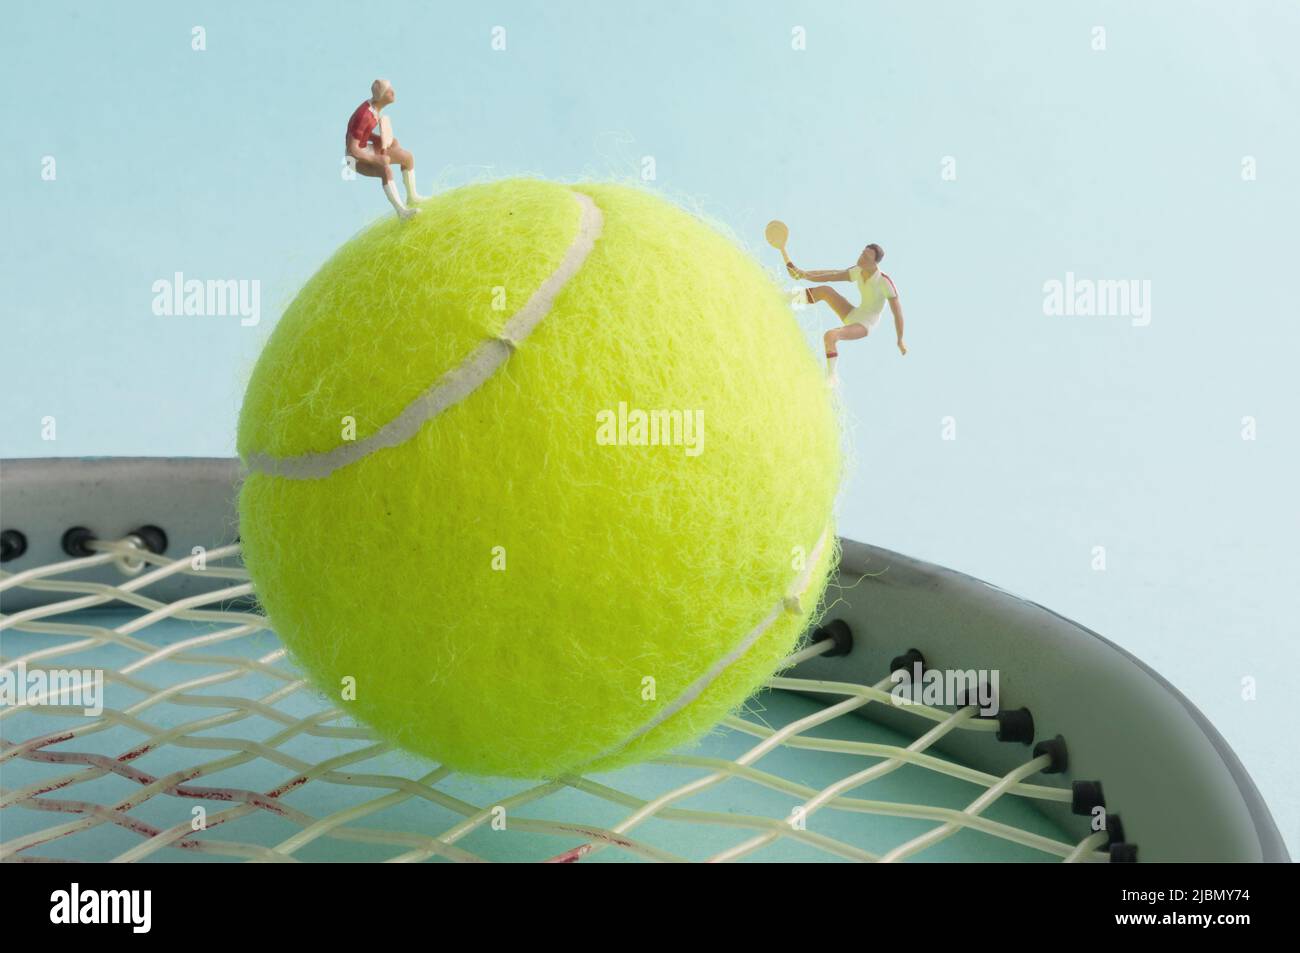 Miniature tennis players on tennis ball and racket playing match Stock Photo